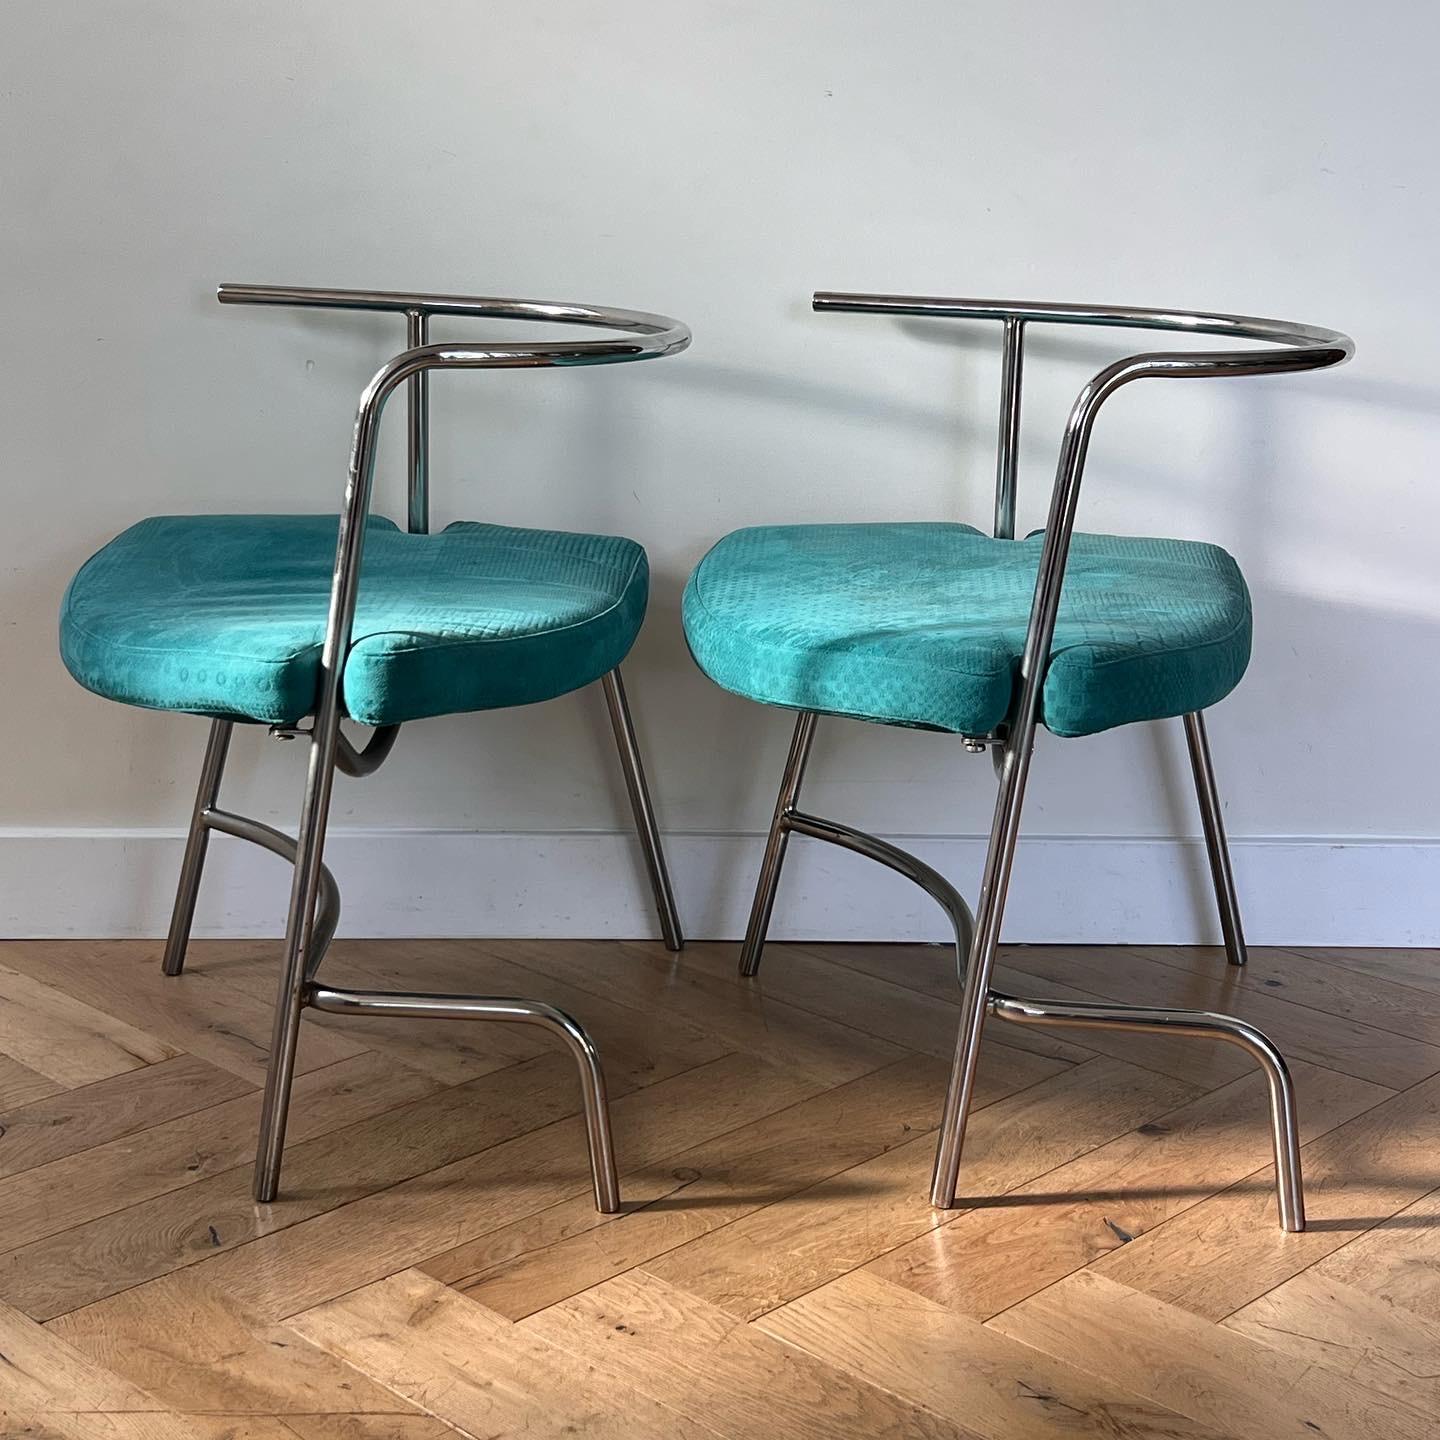 A rare pair of modernist Bauhaus Italian armchairs after Giotto Stoppino and Guido Faleschini, circa 1970. Featuring geometrically unique - and asymmetrical - chrome frames and original turquoise blue upholstery over broad triangular seats. The